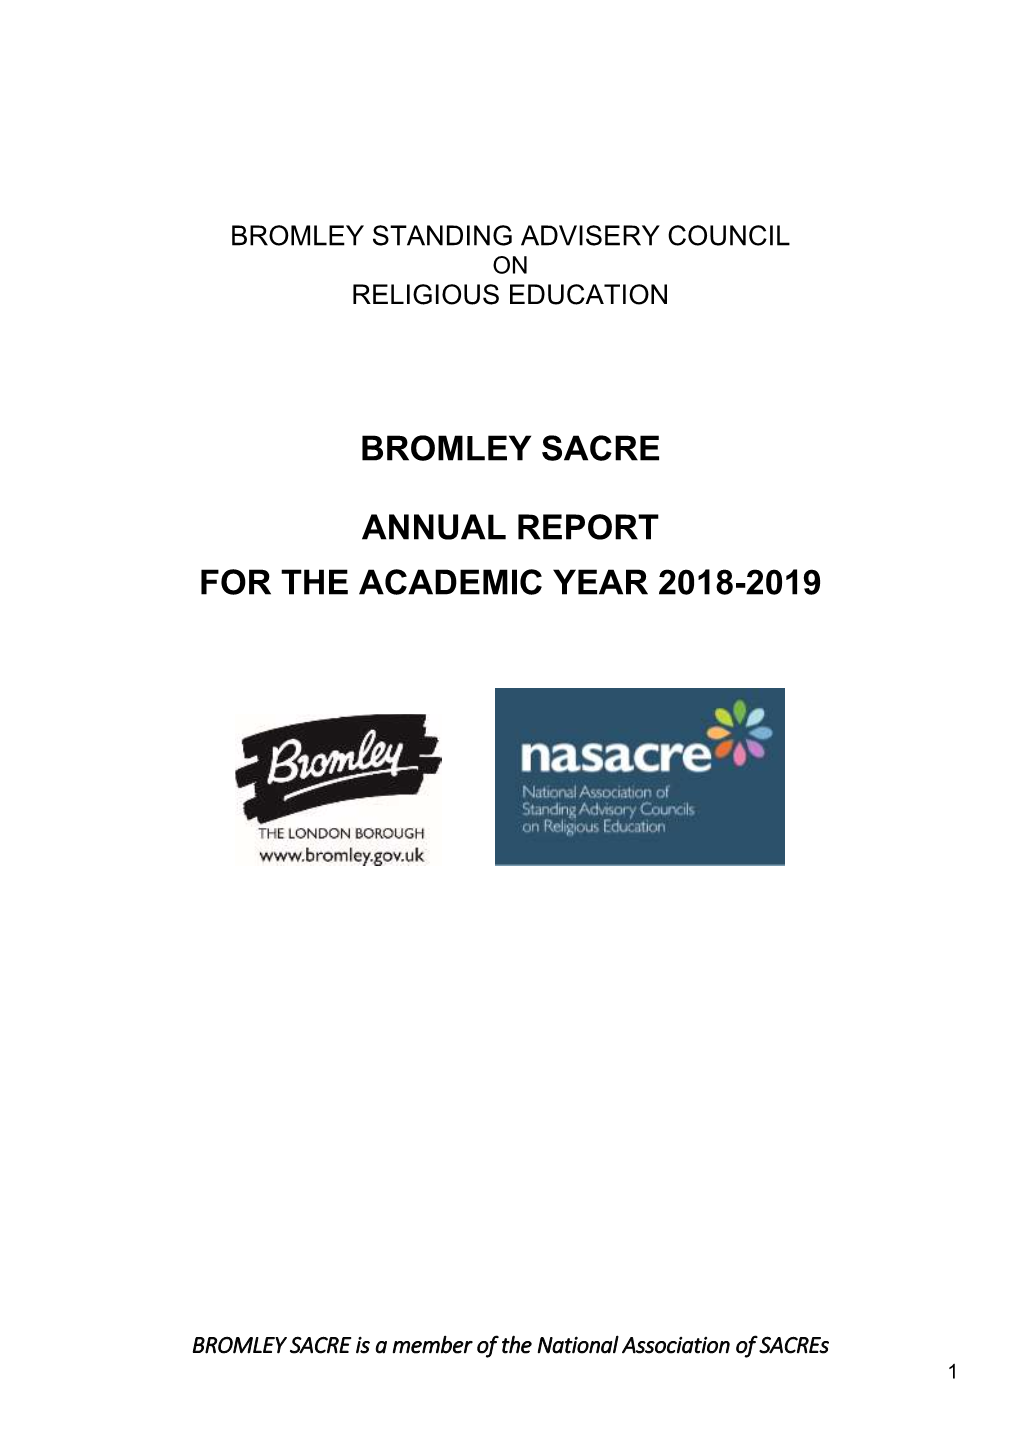 Bromley Sacre Annual Report for the Academic Year